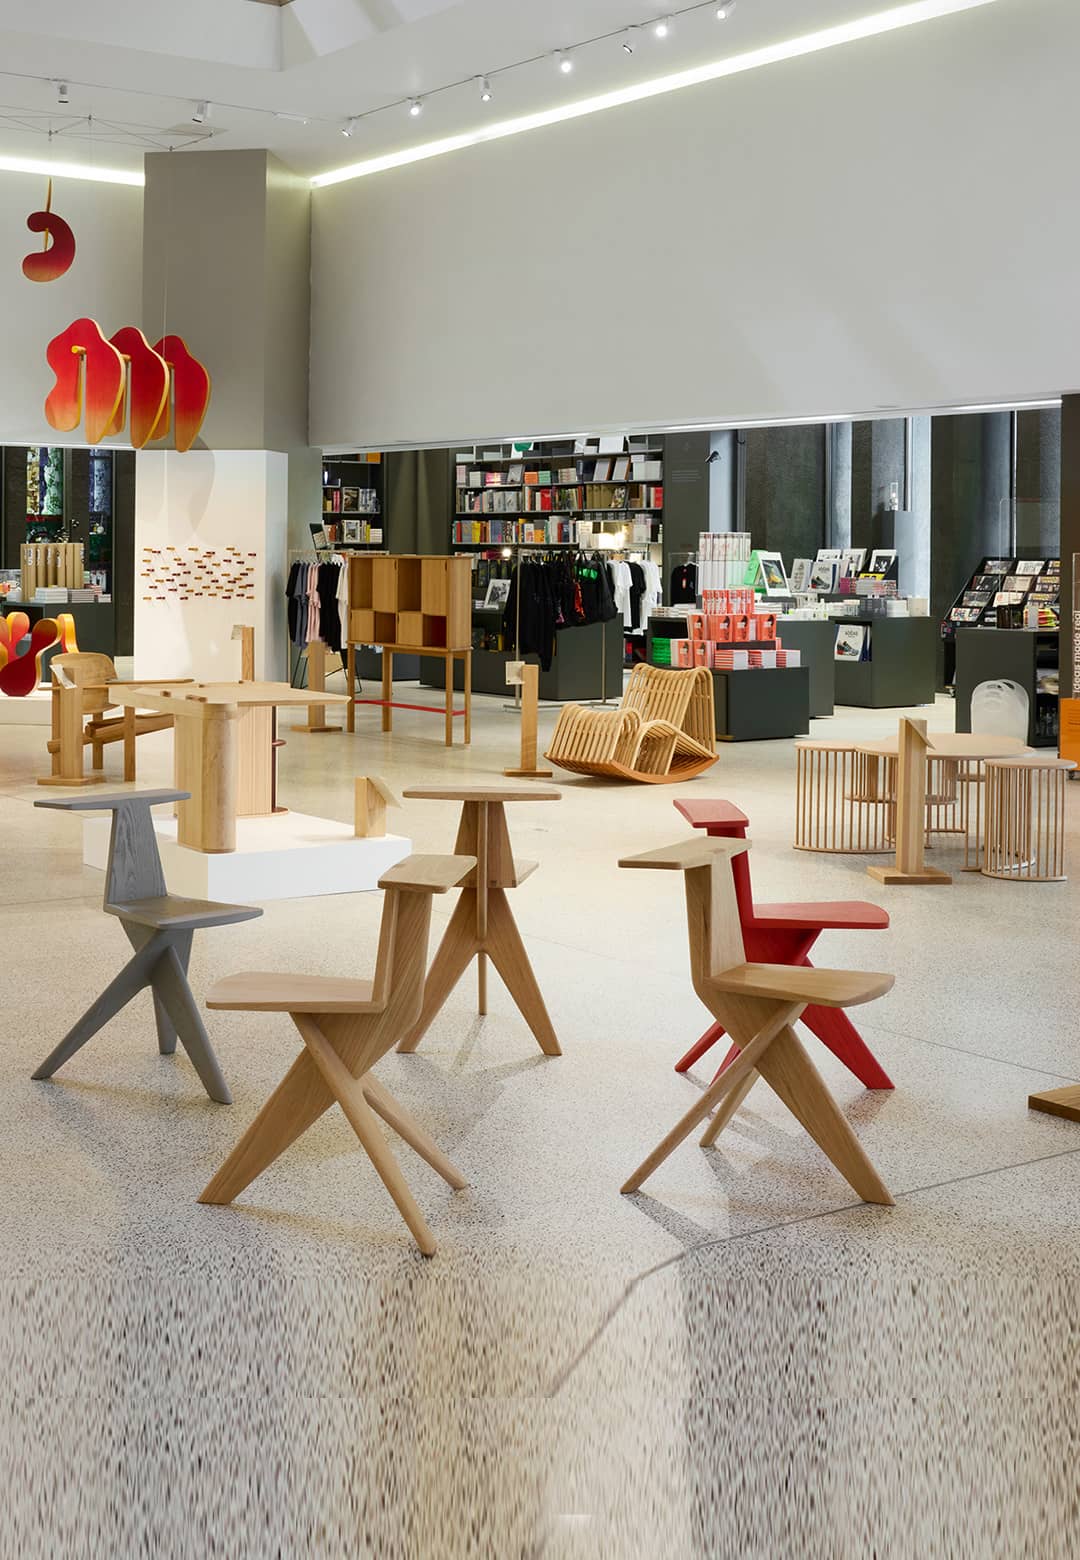 'Discovered' showcases emerging talent at the Design Museum in London